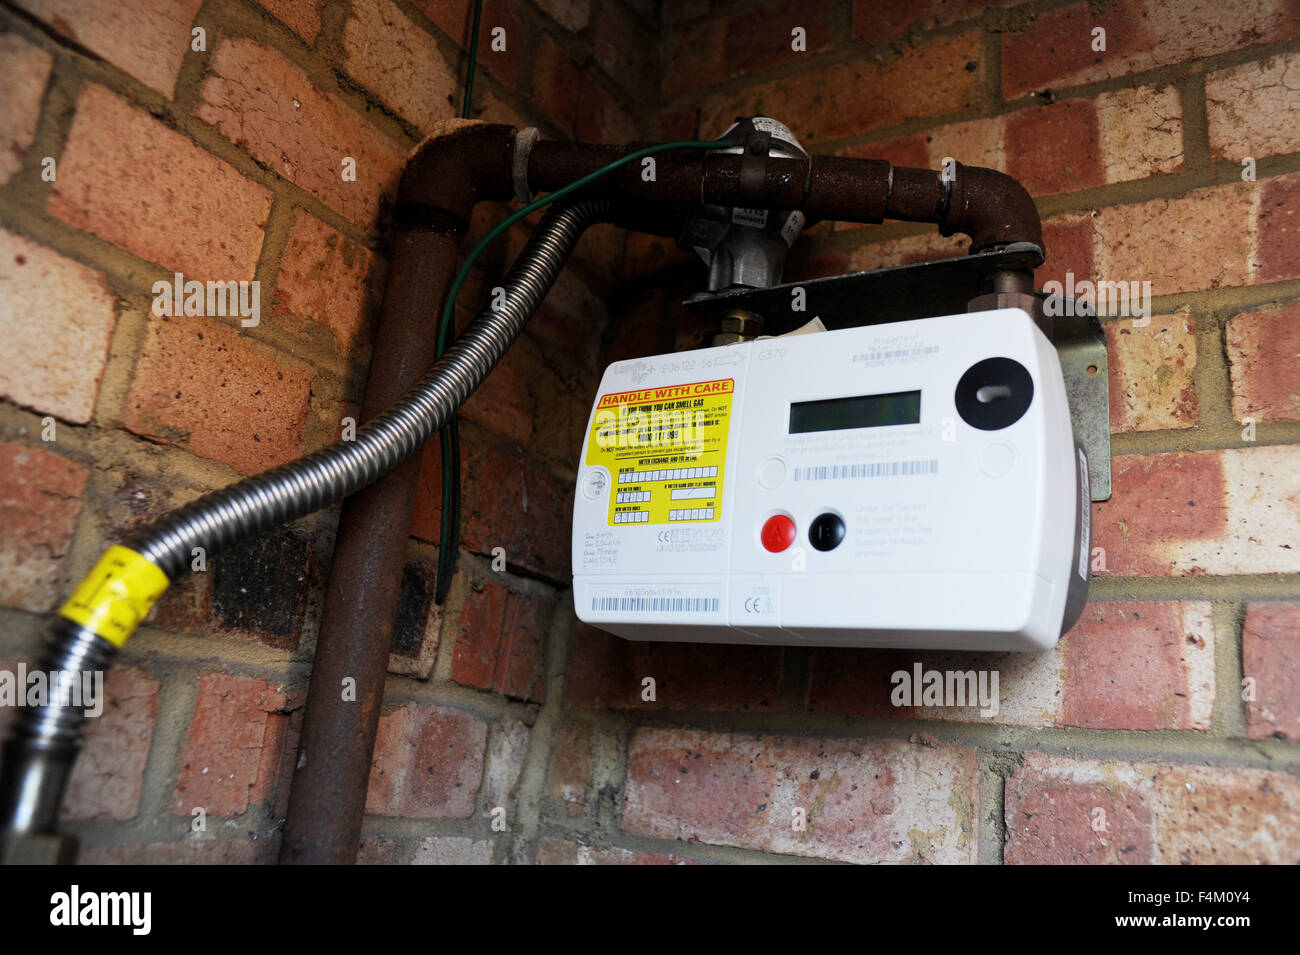 British Gas smart meter to measure household use sending readings back automatically Stock Photo